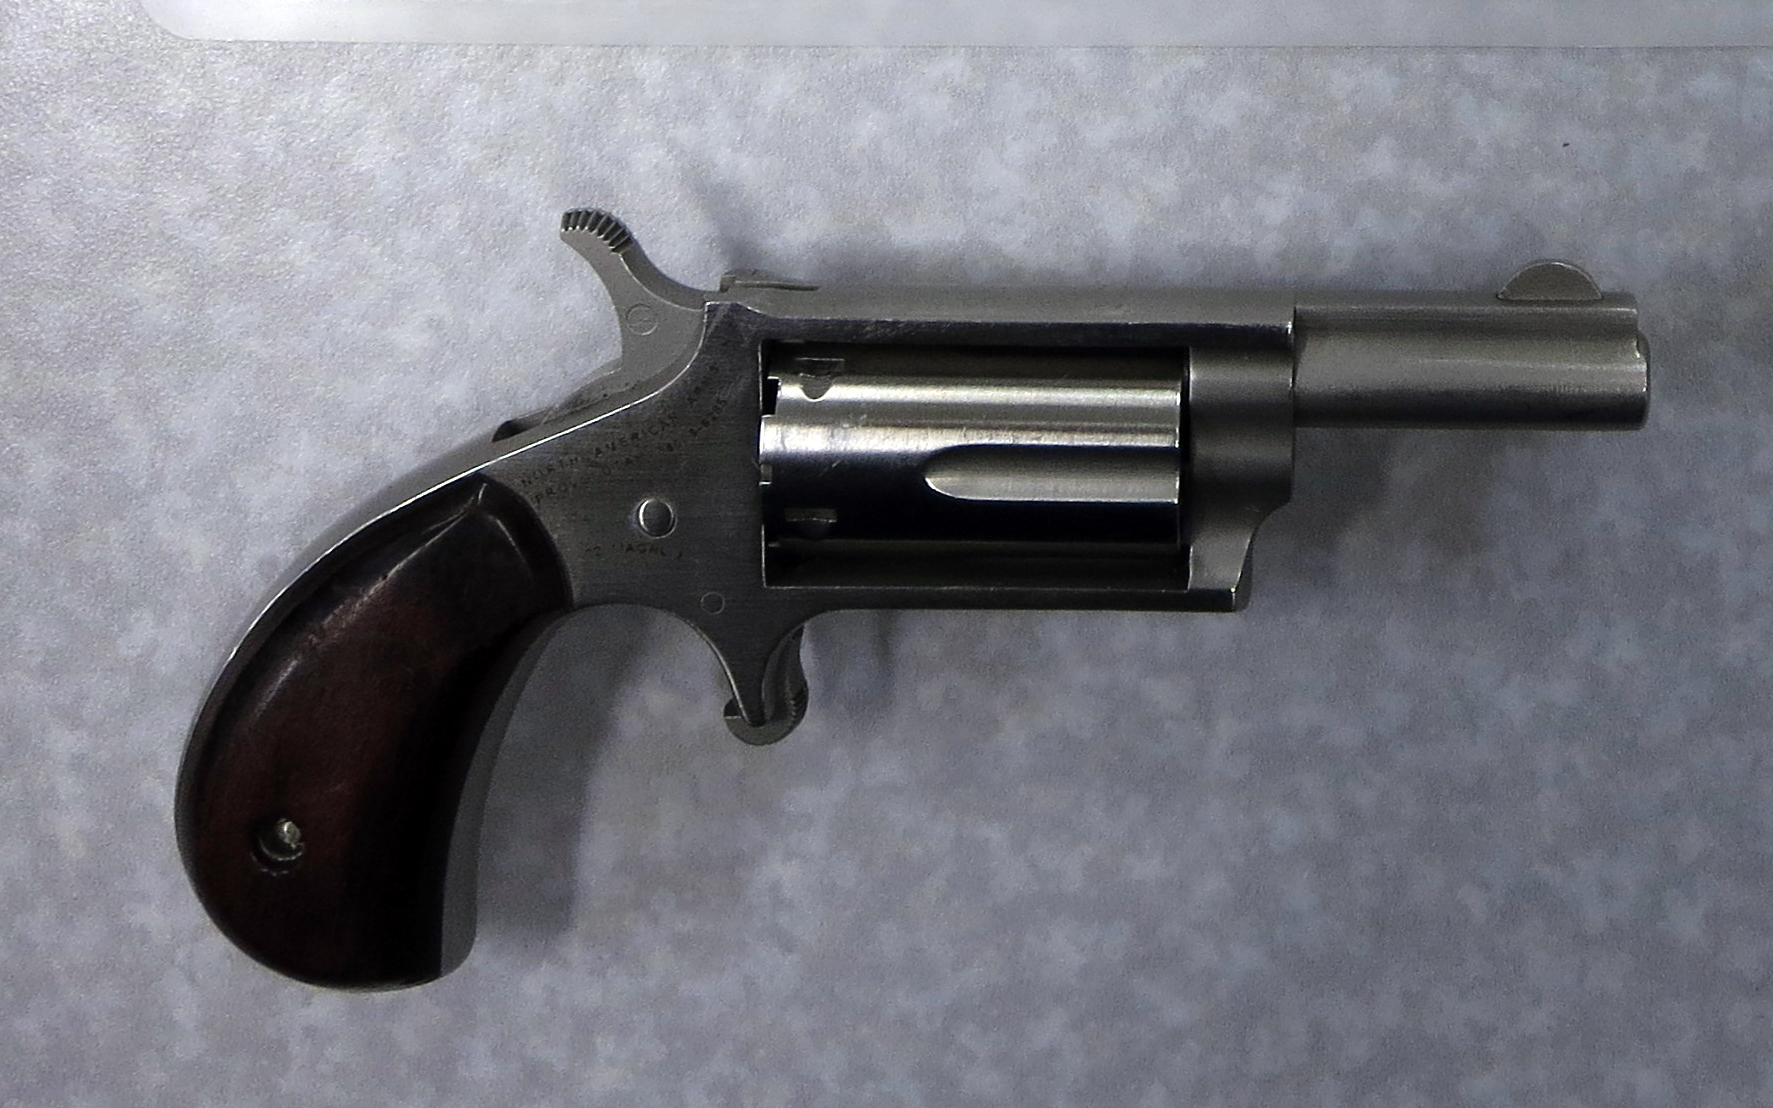 Revolver seized by CBSA officers at Emerson on May 6, 2014.